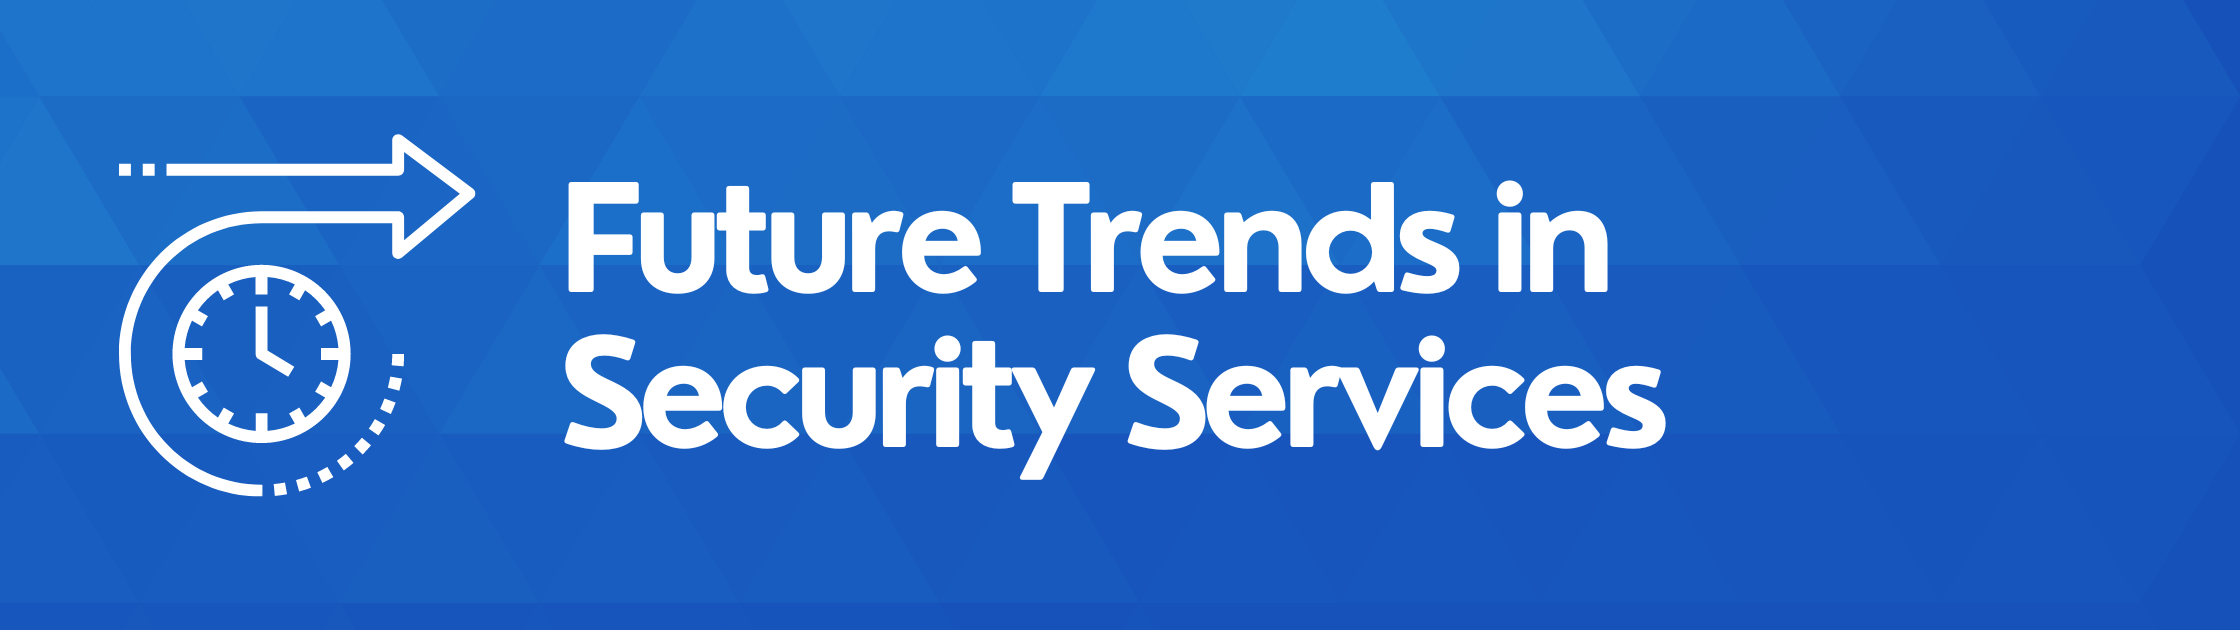 future of security services